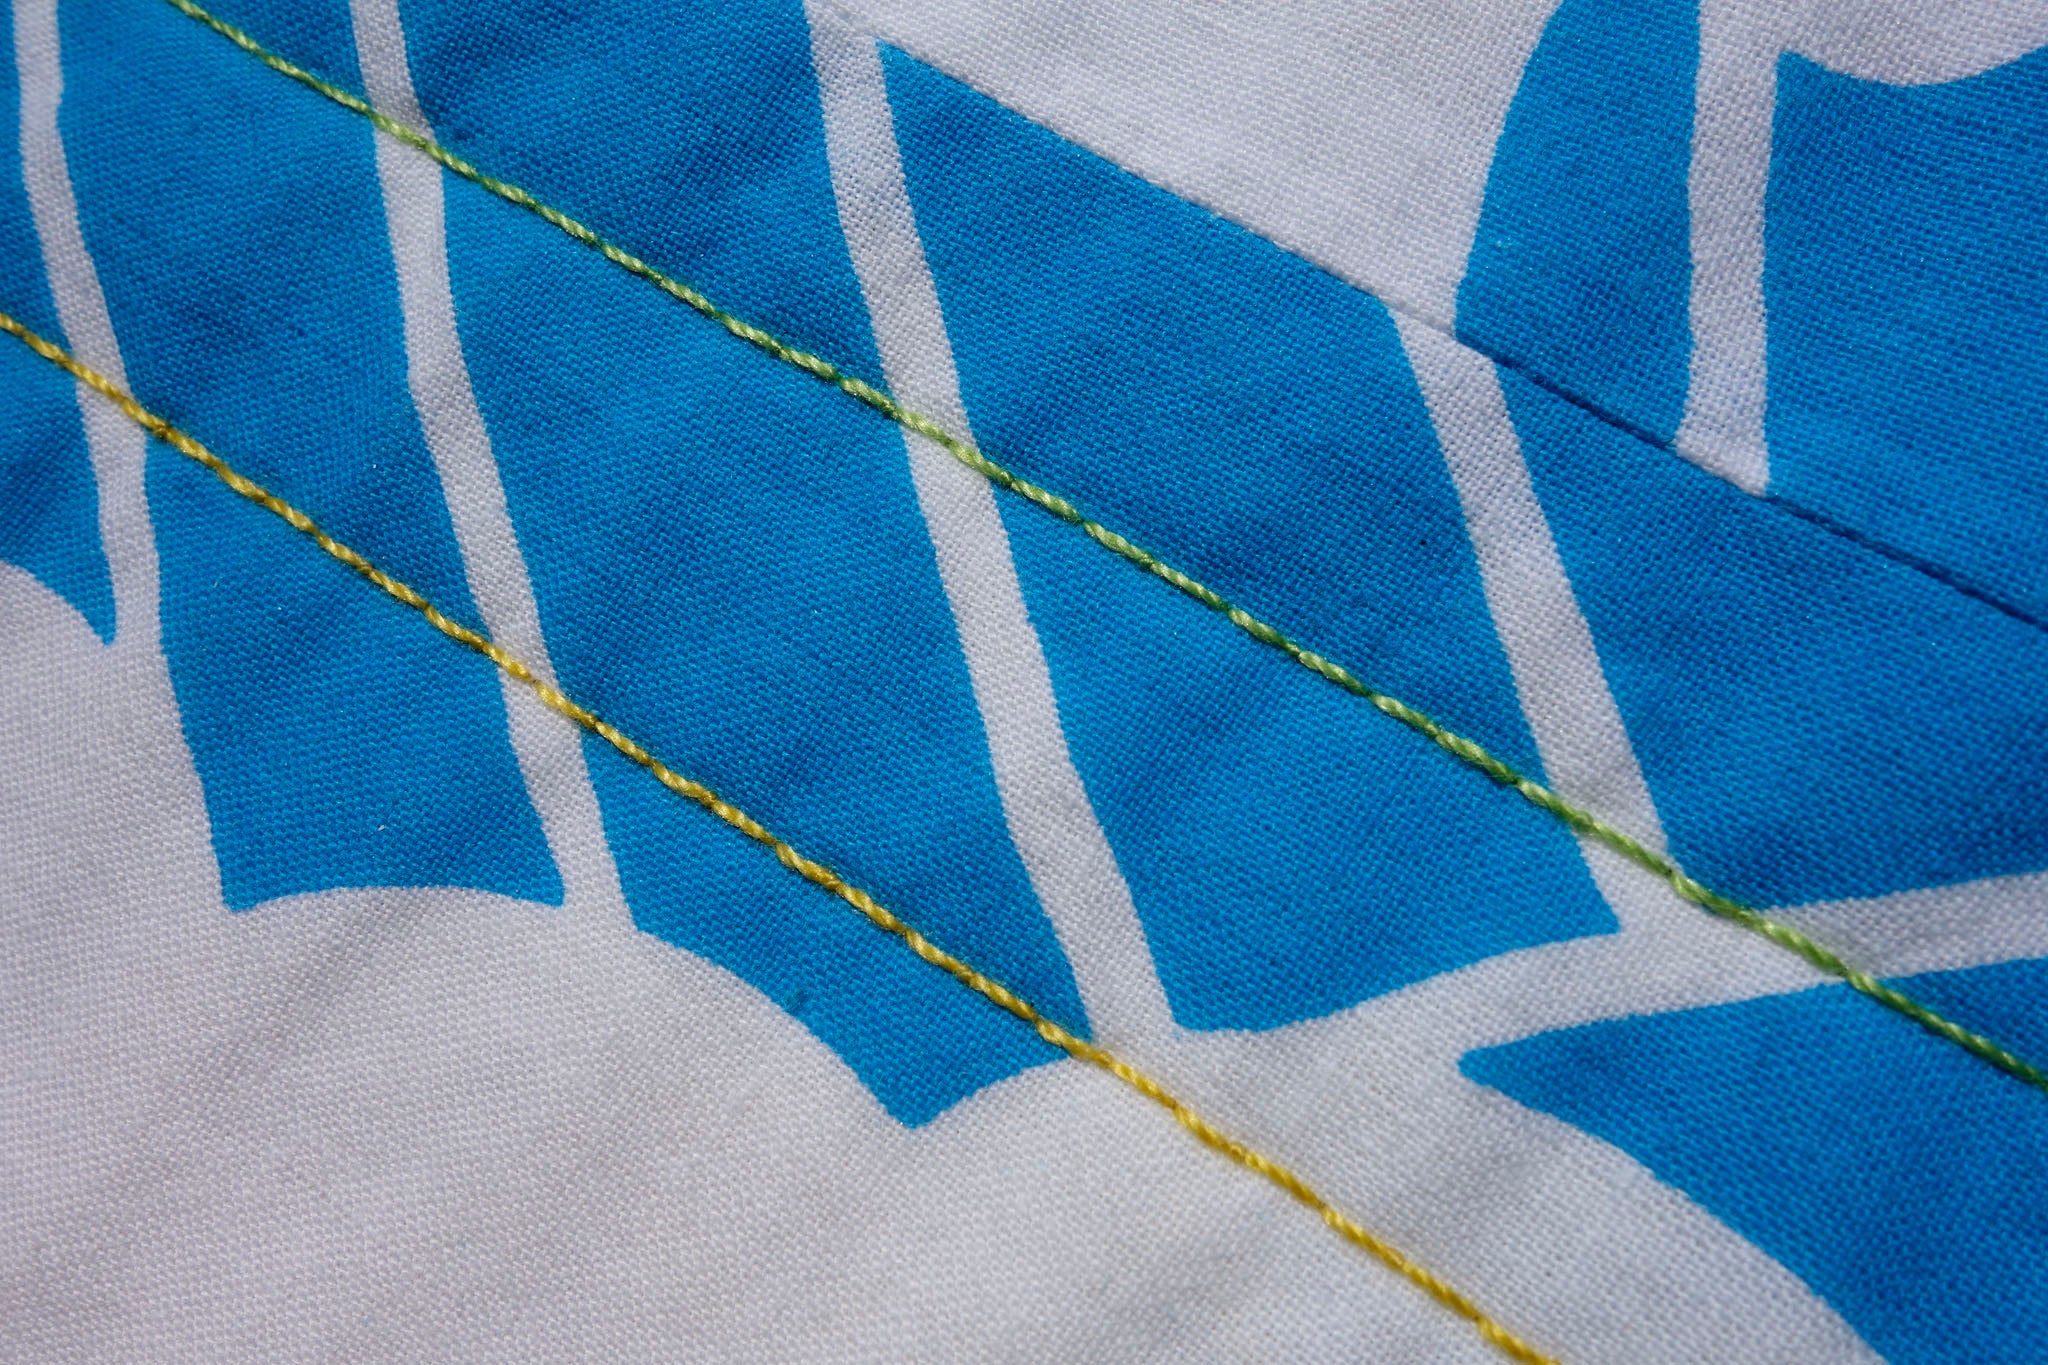 Close-up of Sashiko 2 stitching on back of Boro Quilt by Patricia Belyea of Okan Arts, made with vintage Japanese yukata cottons